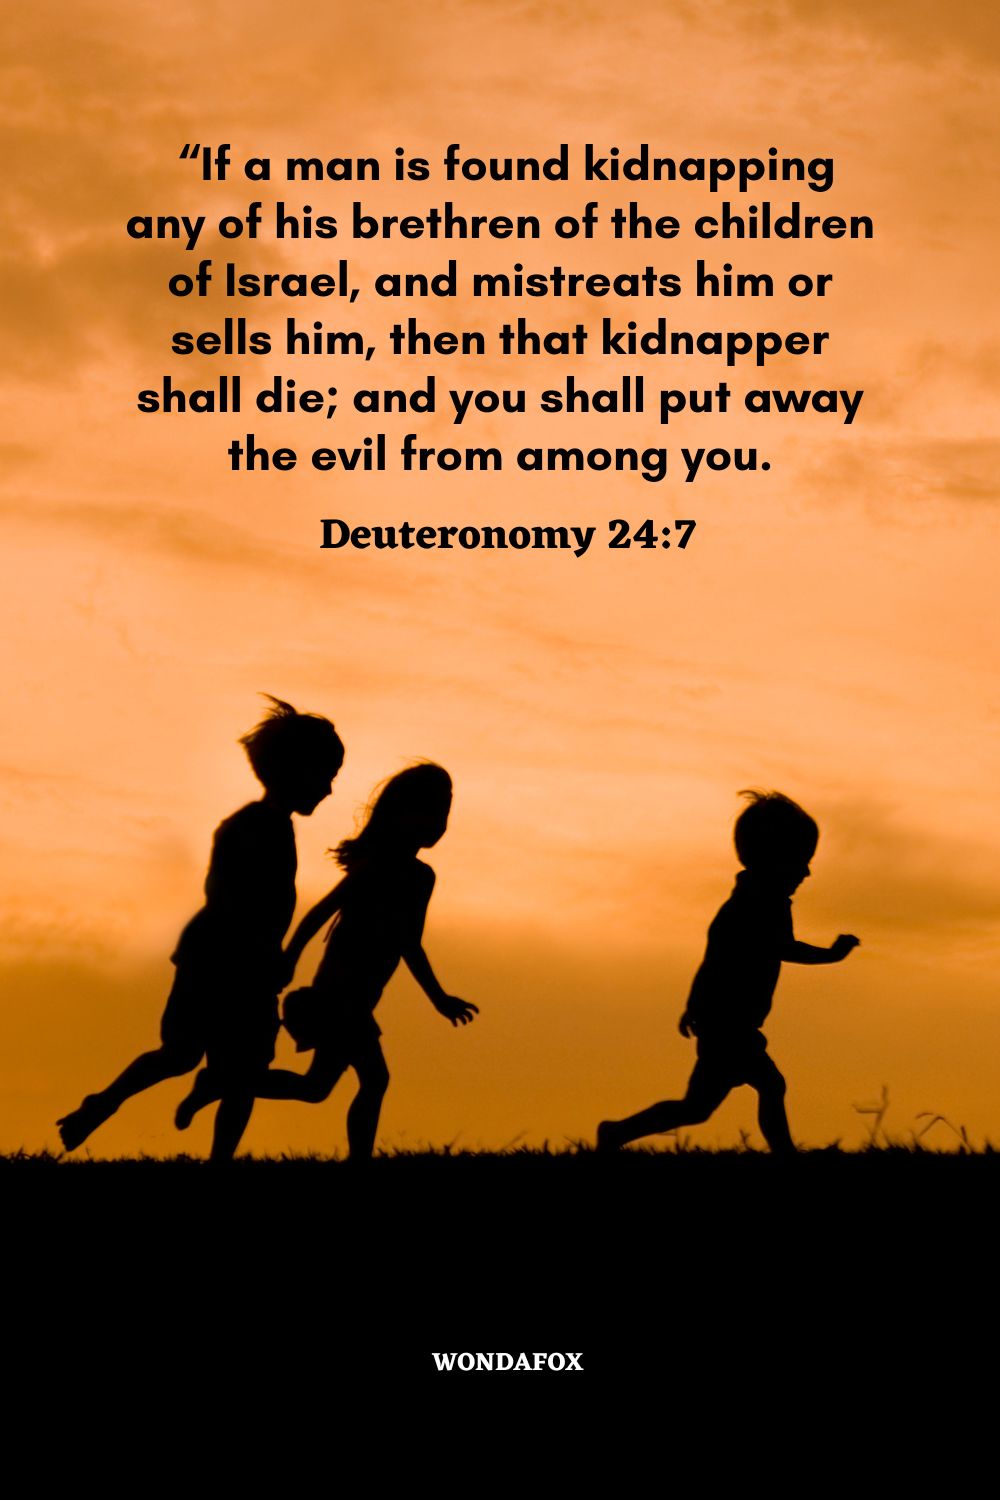  “If a man is found kidnapping any of his brethren of the children of Israel, and mistreats him or sells him, then that kidnapper shall die; and you shall put away the evil from among you.
Deuteronomy 24:7 
